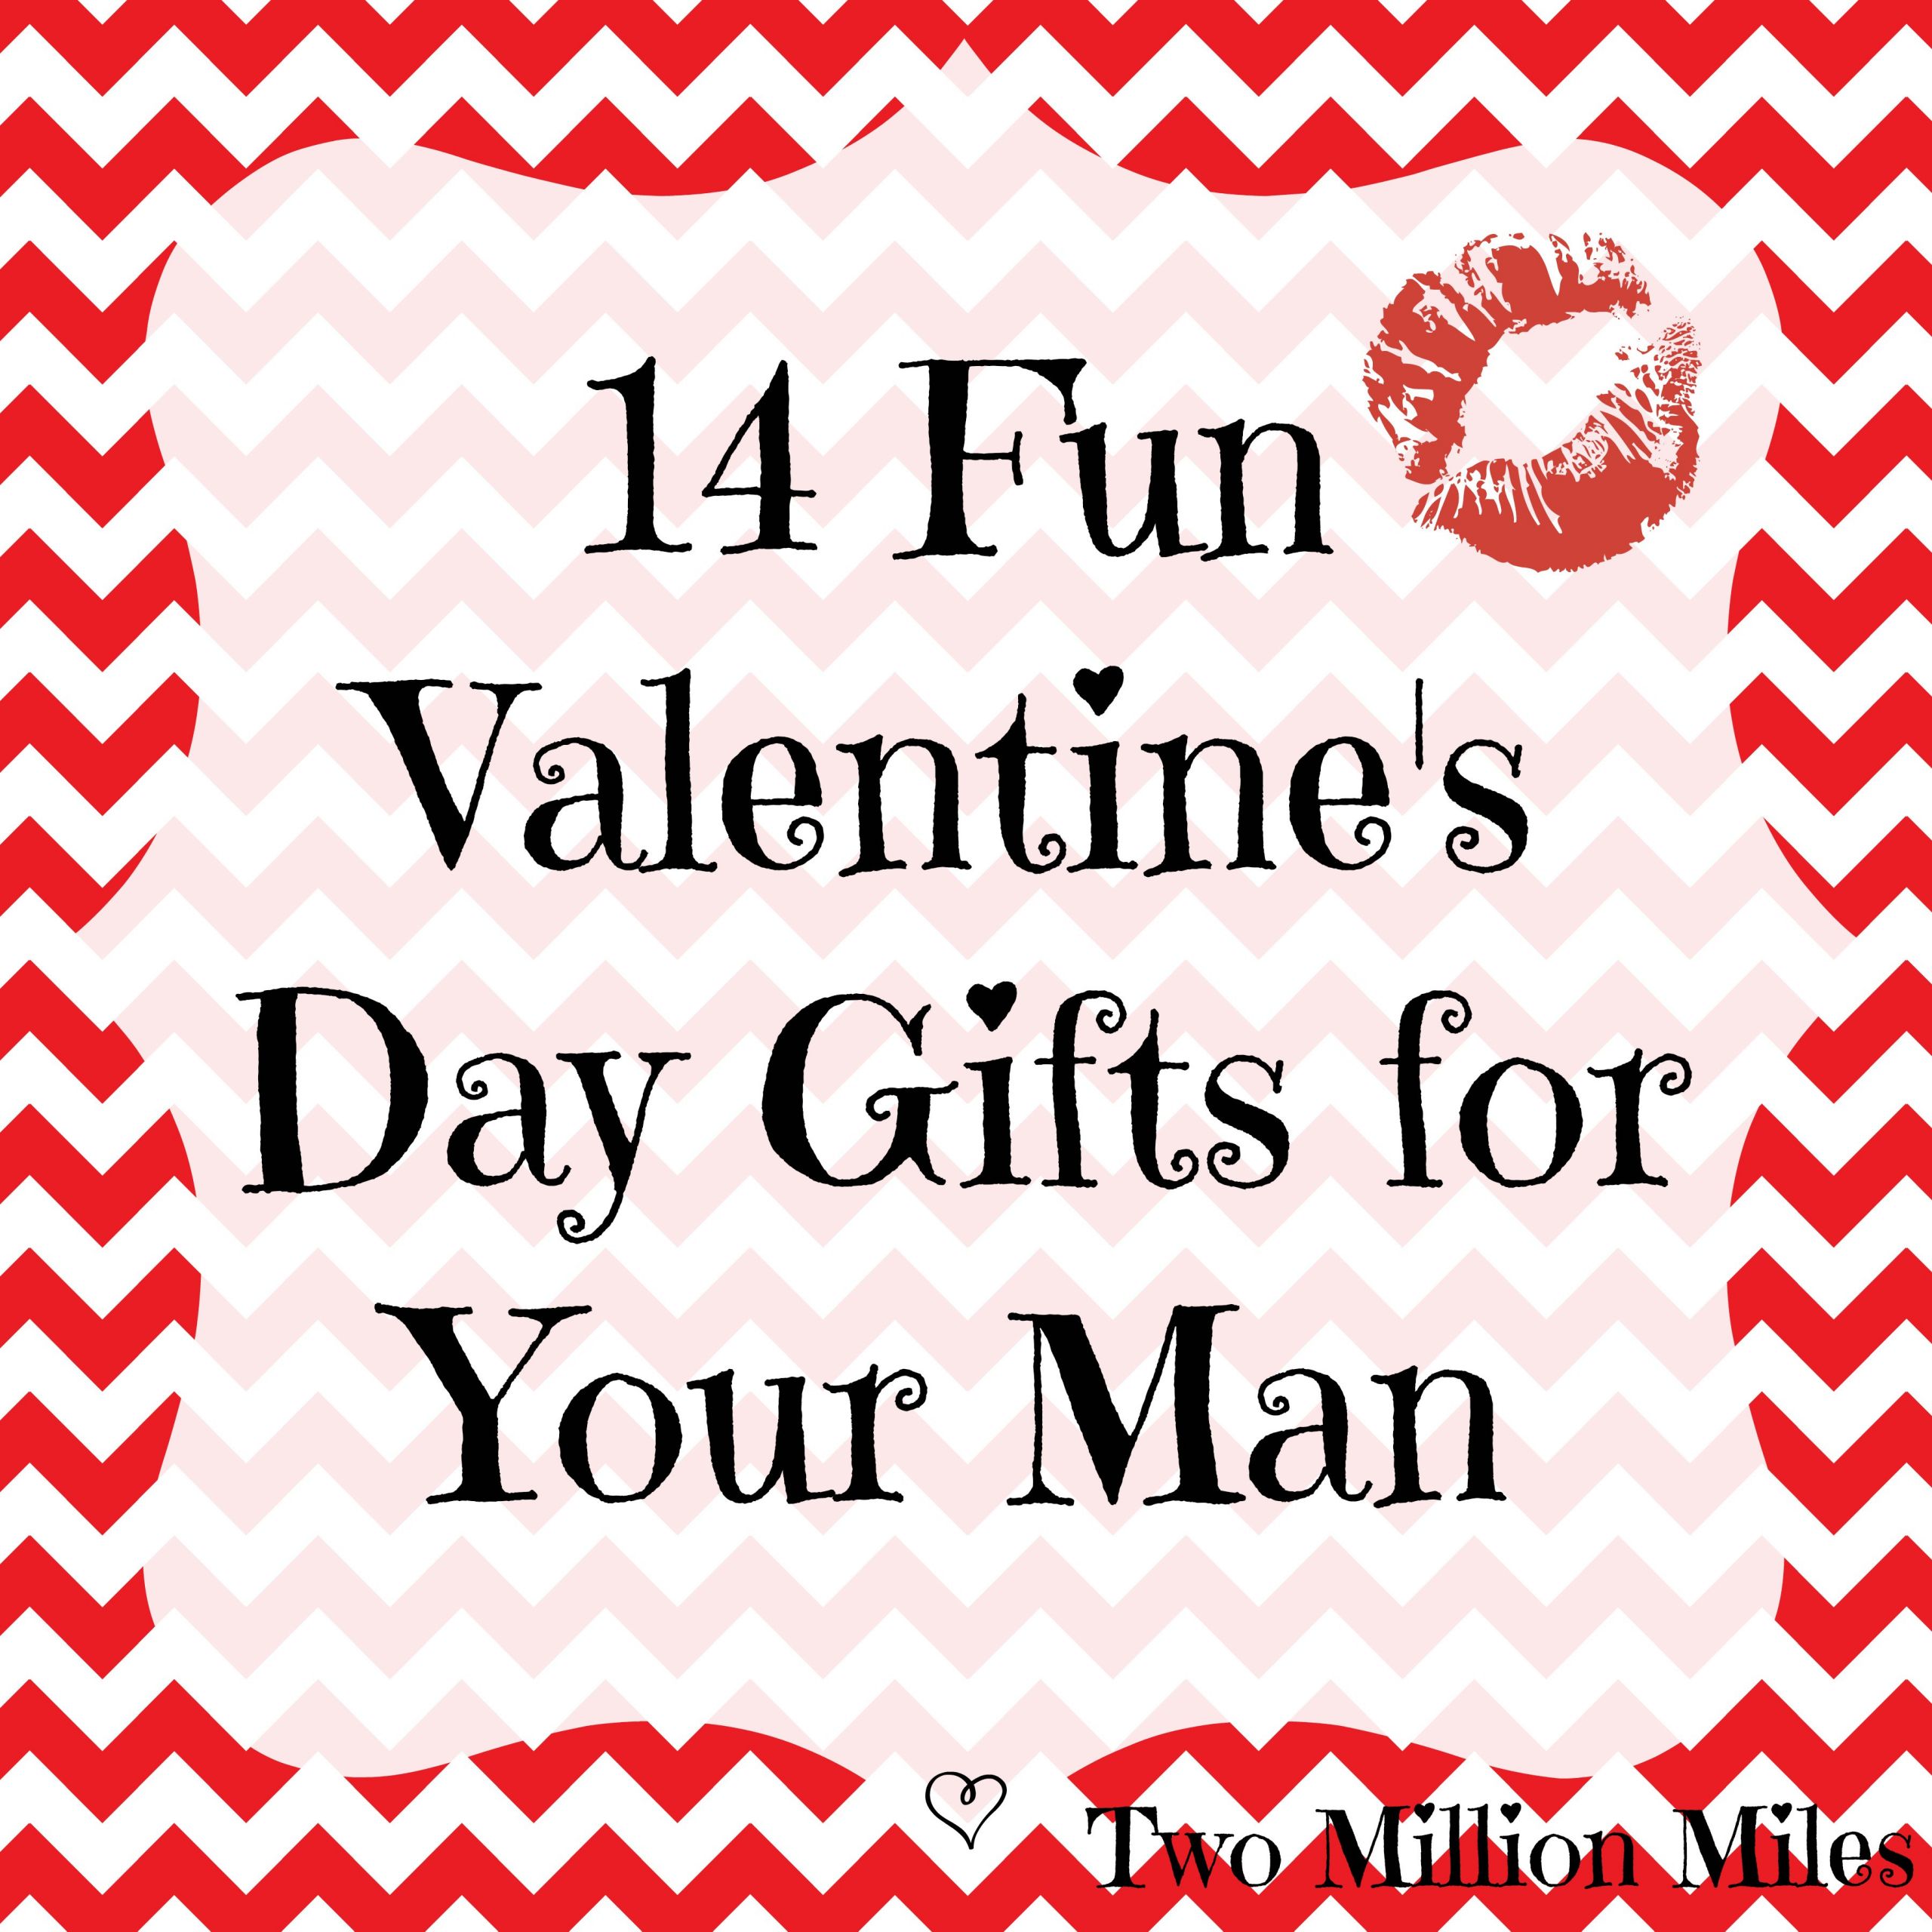 Valentines Day Male Gift Ideas
 14 Valentine’s Day Gifts for Your Man